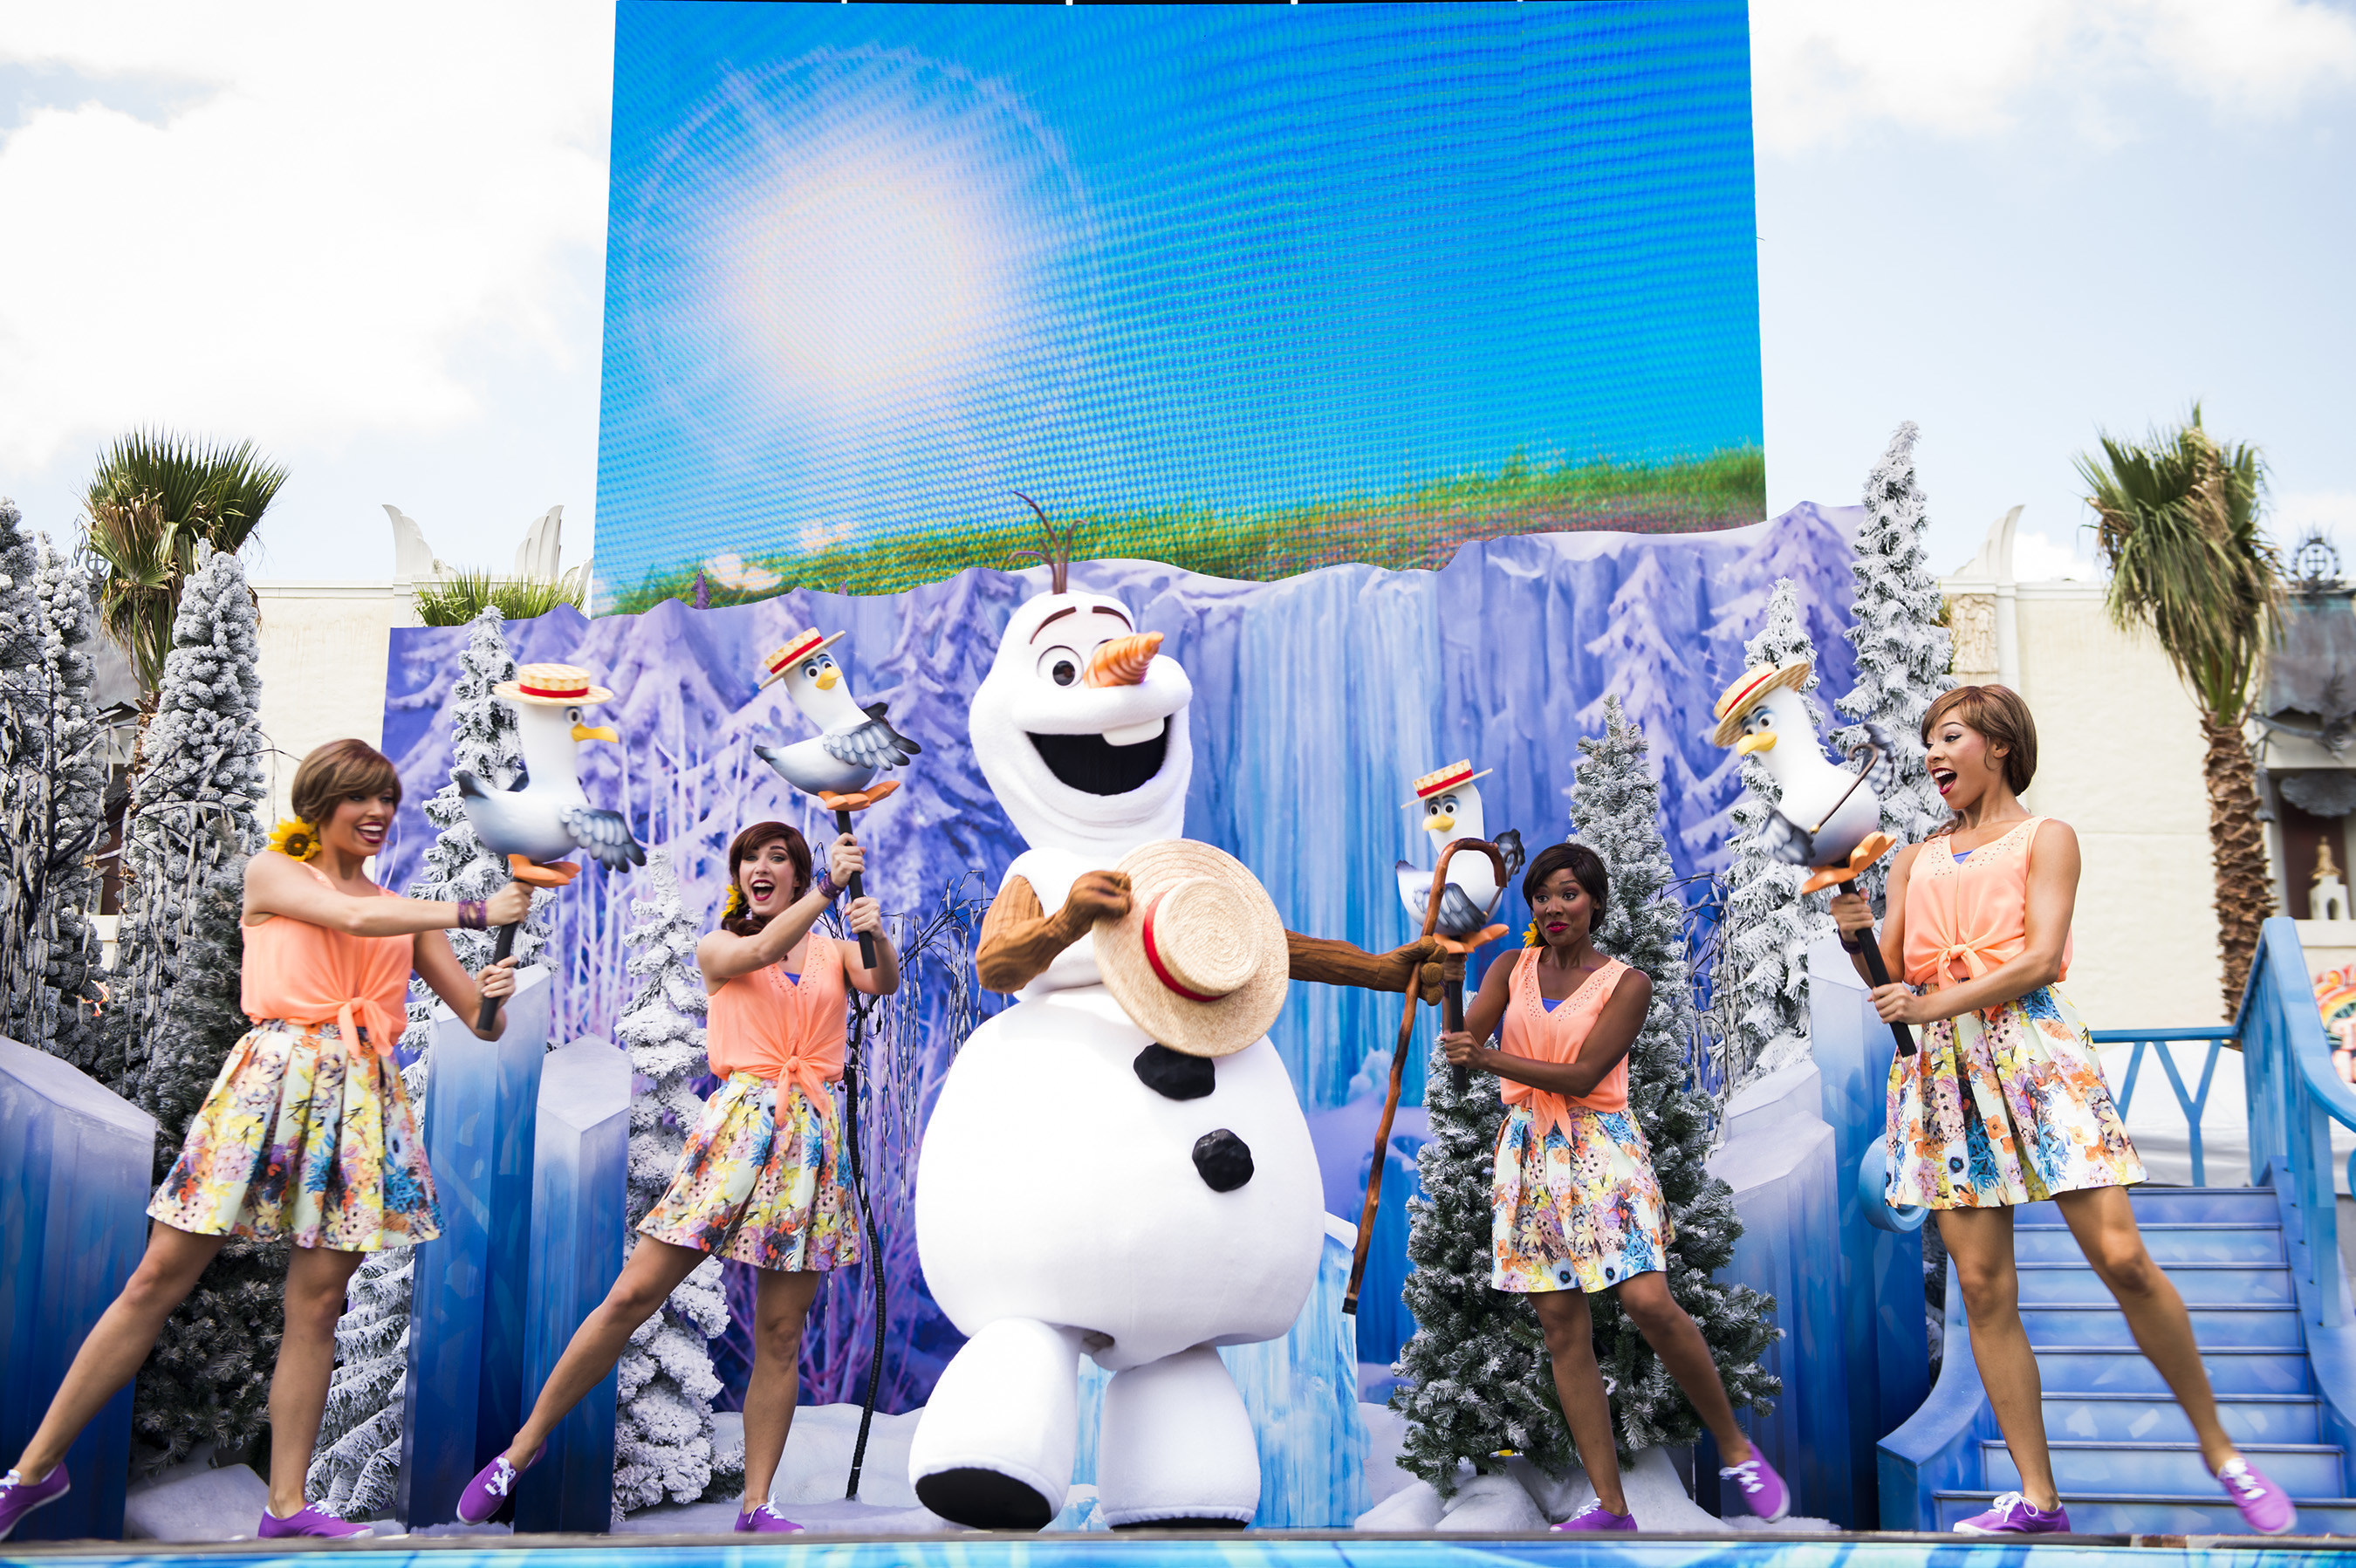 Several times each day from June 17 through Sept. 7, the Ambassador of Hollywoodland brings Olaf and some of his friends to the Event Stage at Disney's Hollywood Studios to have a little fun with everyone "In Summer." And as temperatures heat up, Olaf happily shares a burst from his personal snow cloud to cool things off. It's all part of "Frozen" Summer Fun, now at Disney's Hollywood Studios, one of four theme parks at Walt Disney World Resort in Lake Buena Vista, Fla. (Ryan Wendler, photographer)